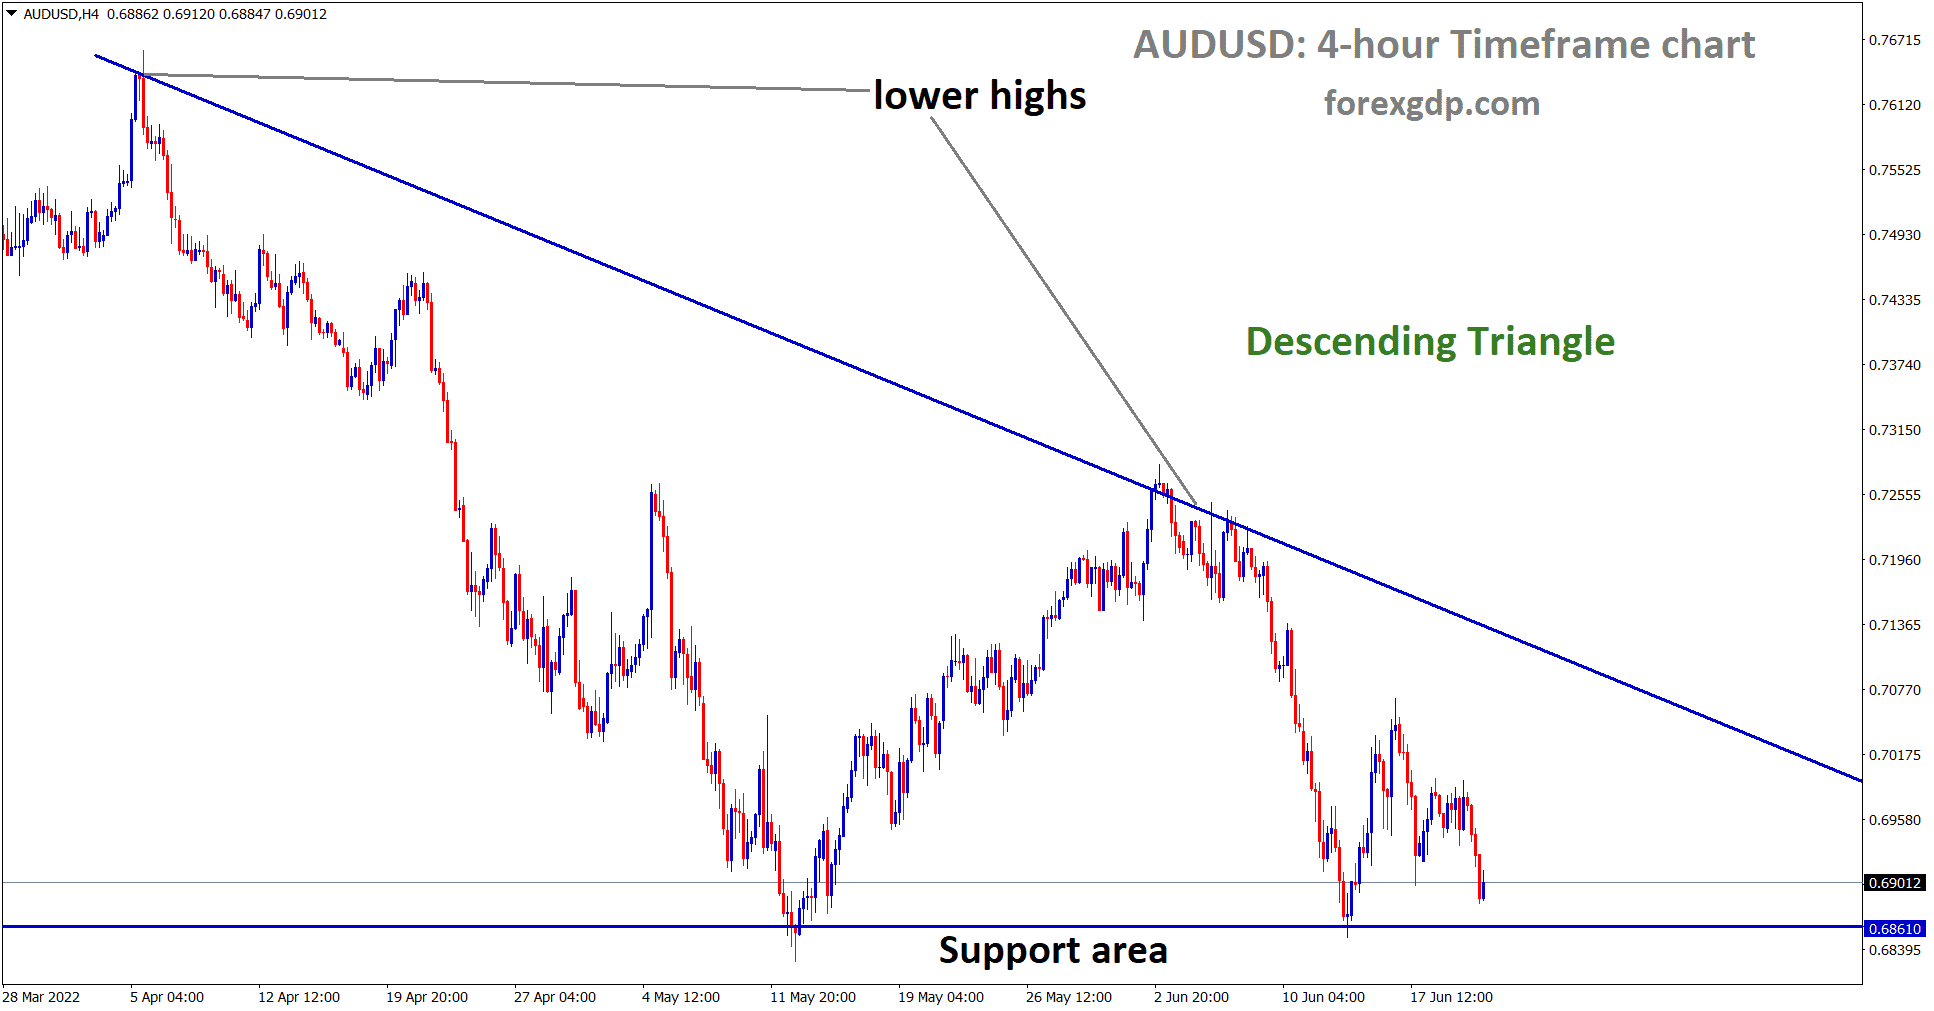 AUDUSD is moving in a descending triangle pattern and the market has reached the support area of the pattern.